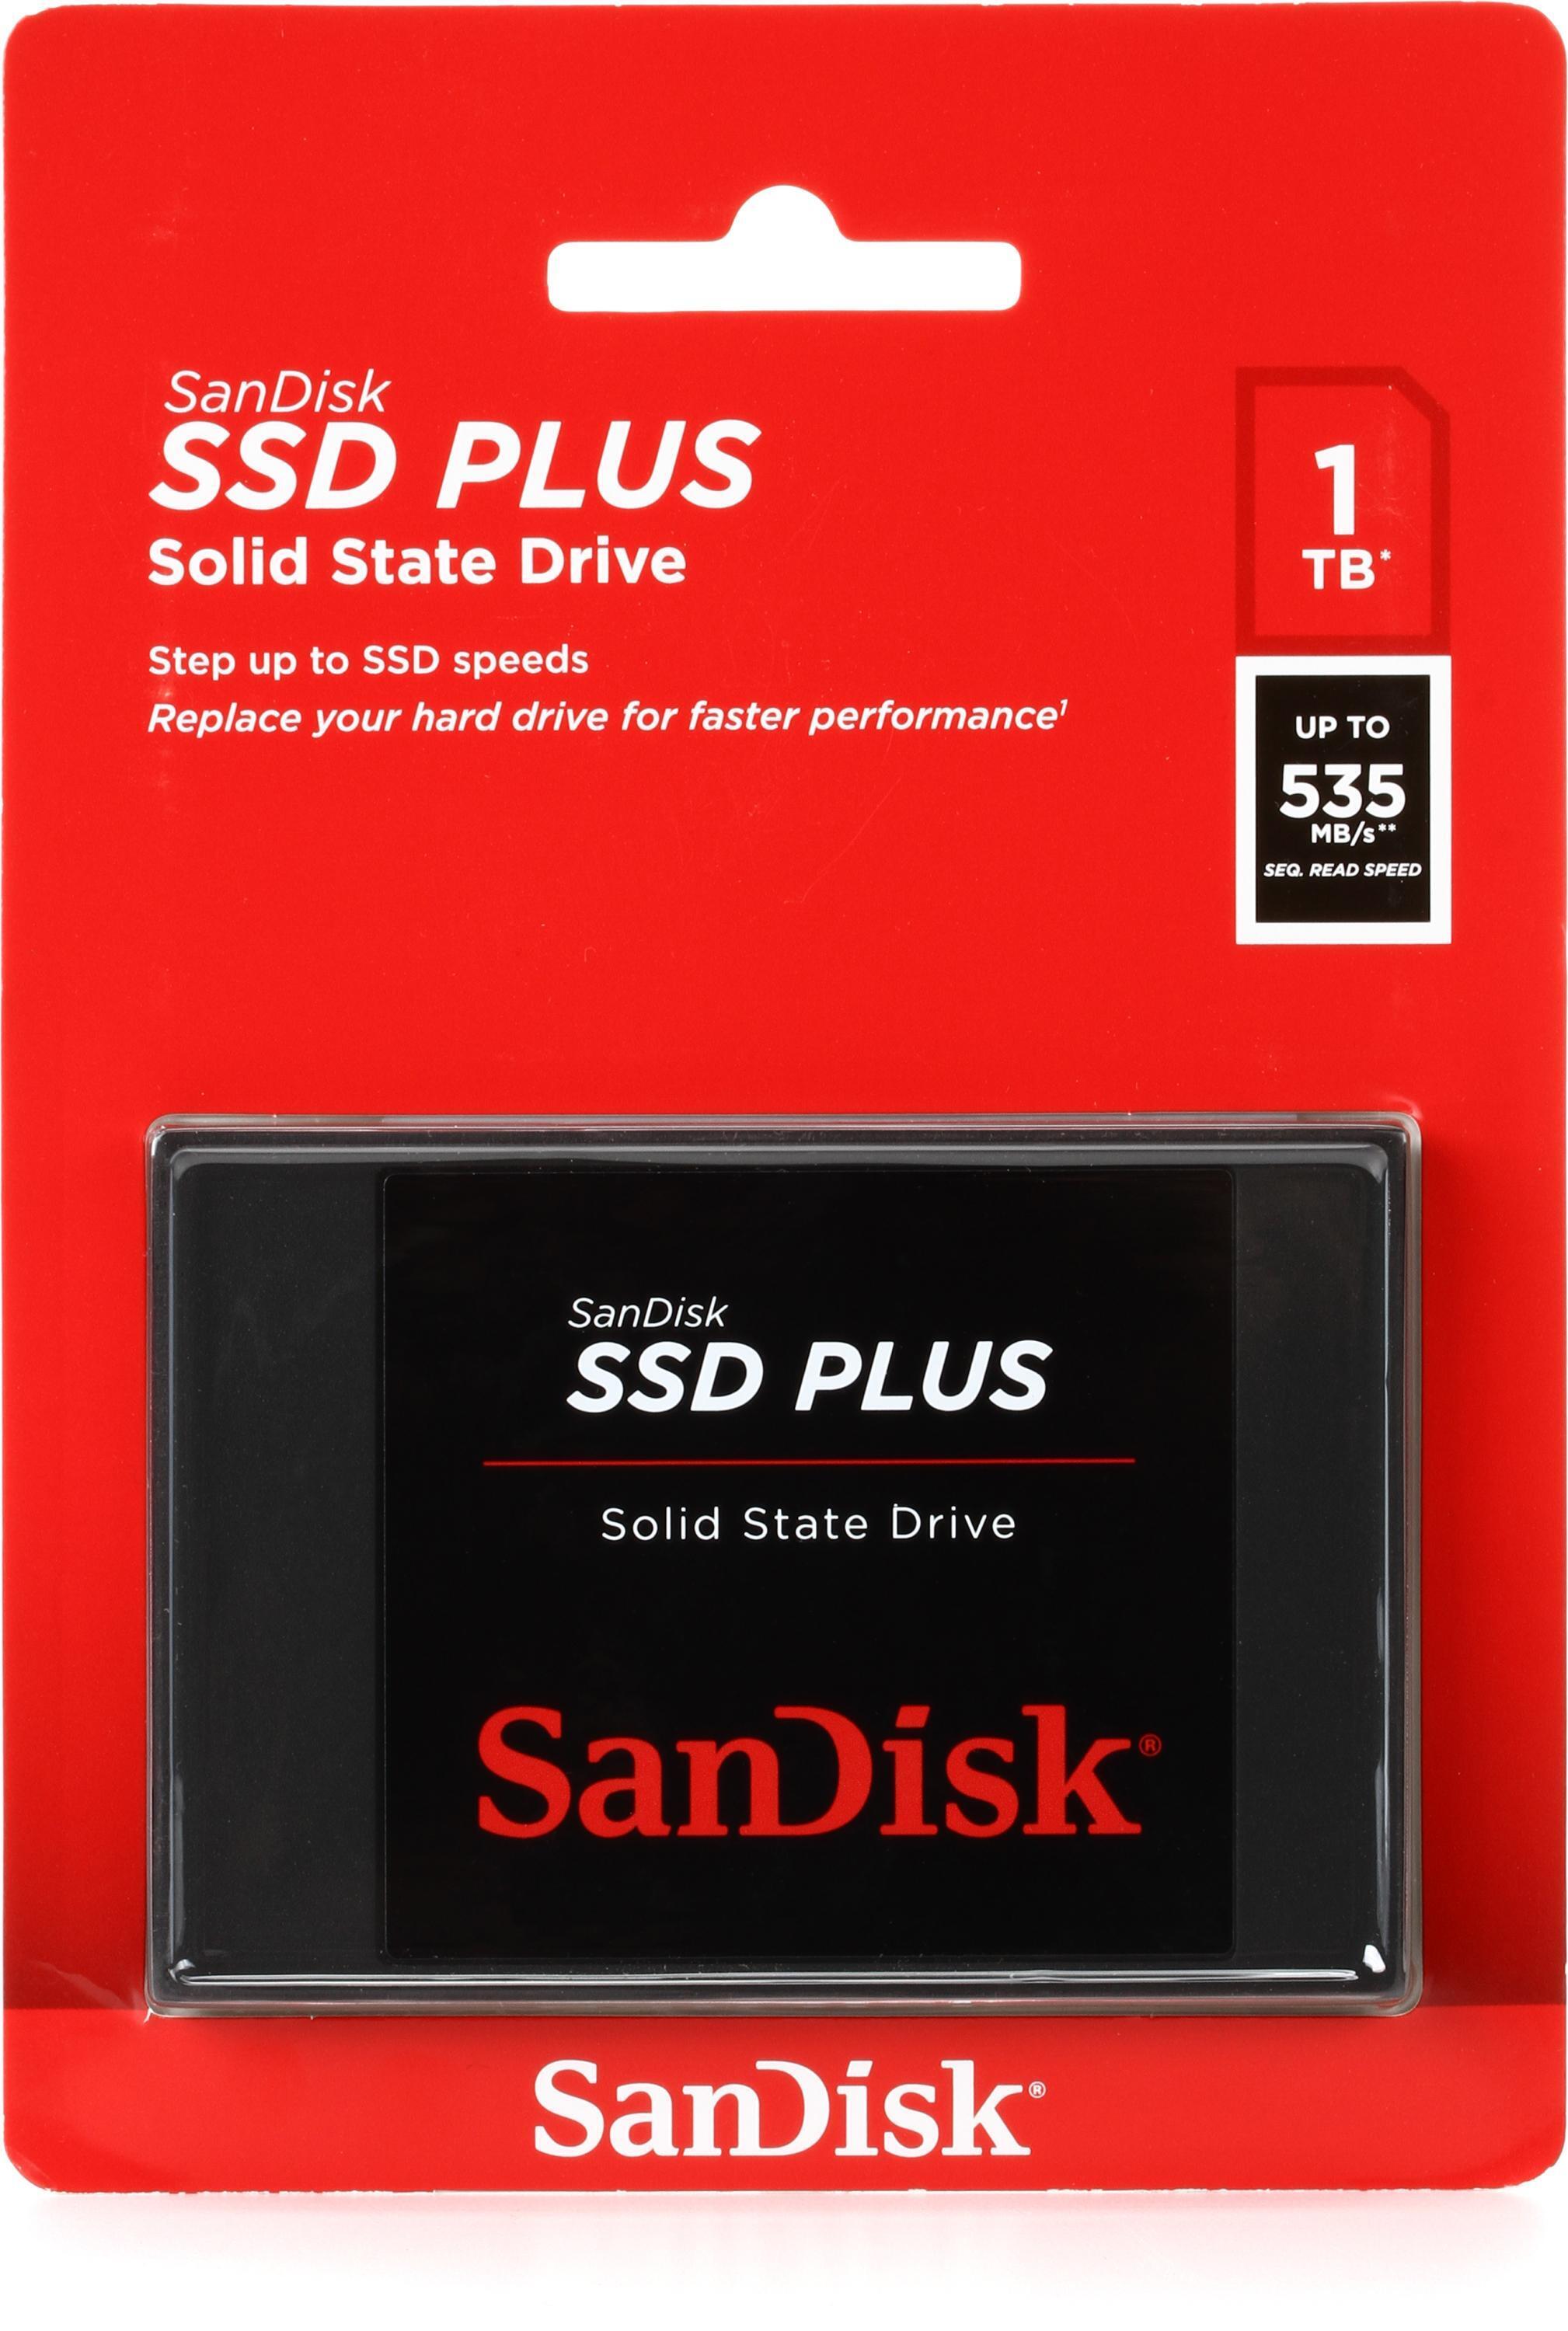 SanDisk SSD Plus 1TB Solid State Drive | Sweetwater